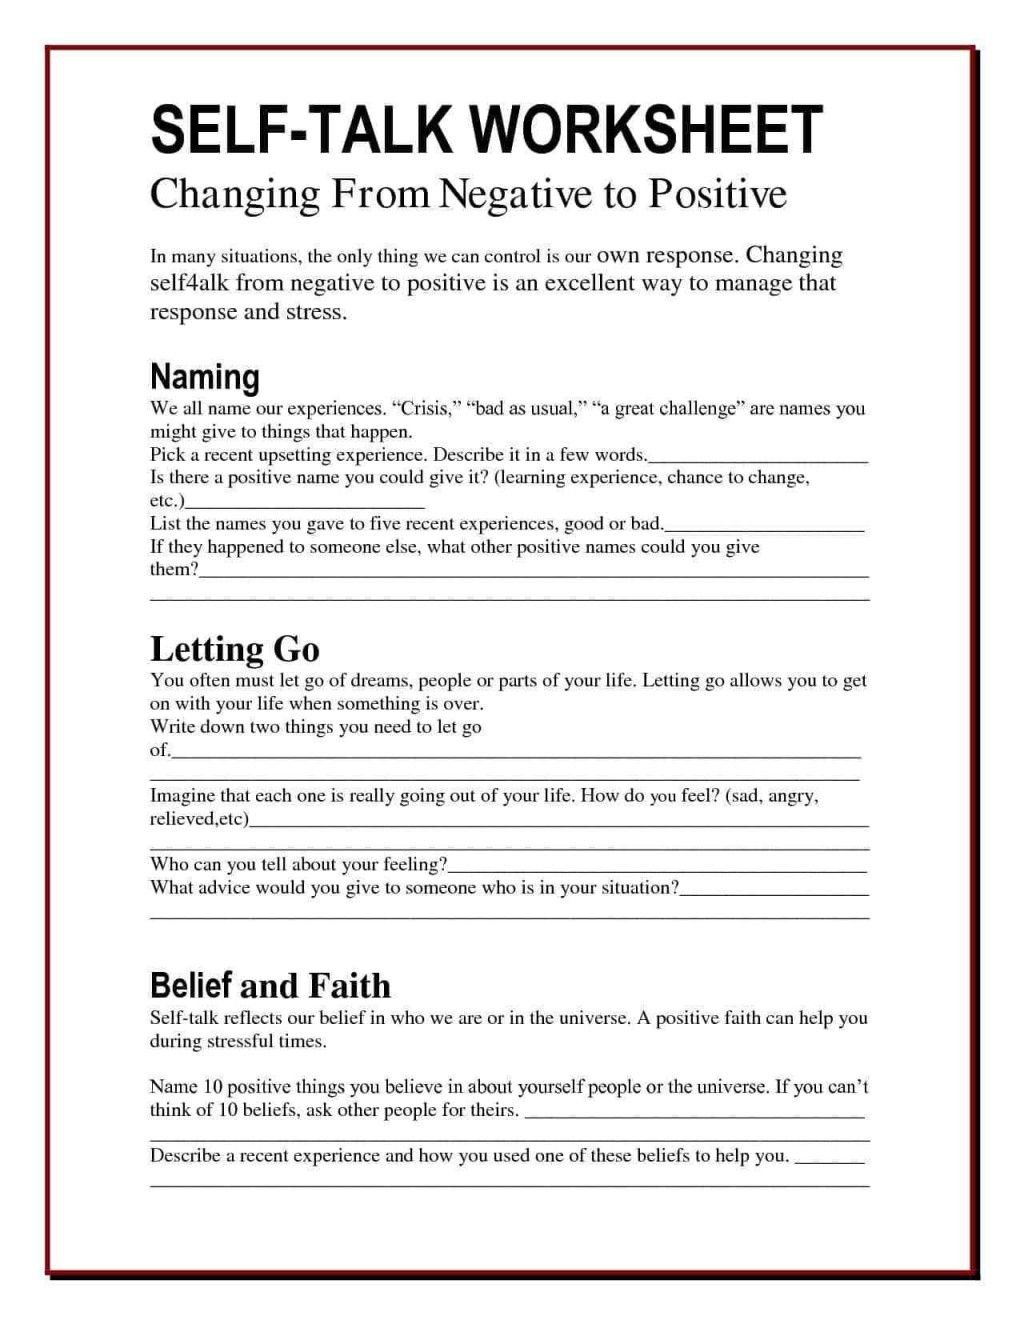 worksheets-for-addiction-recovery